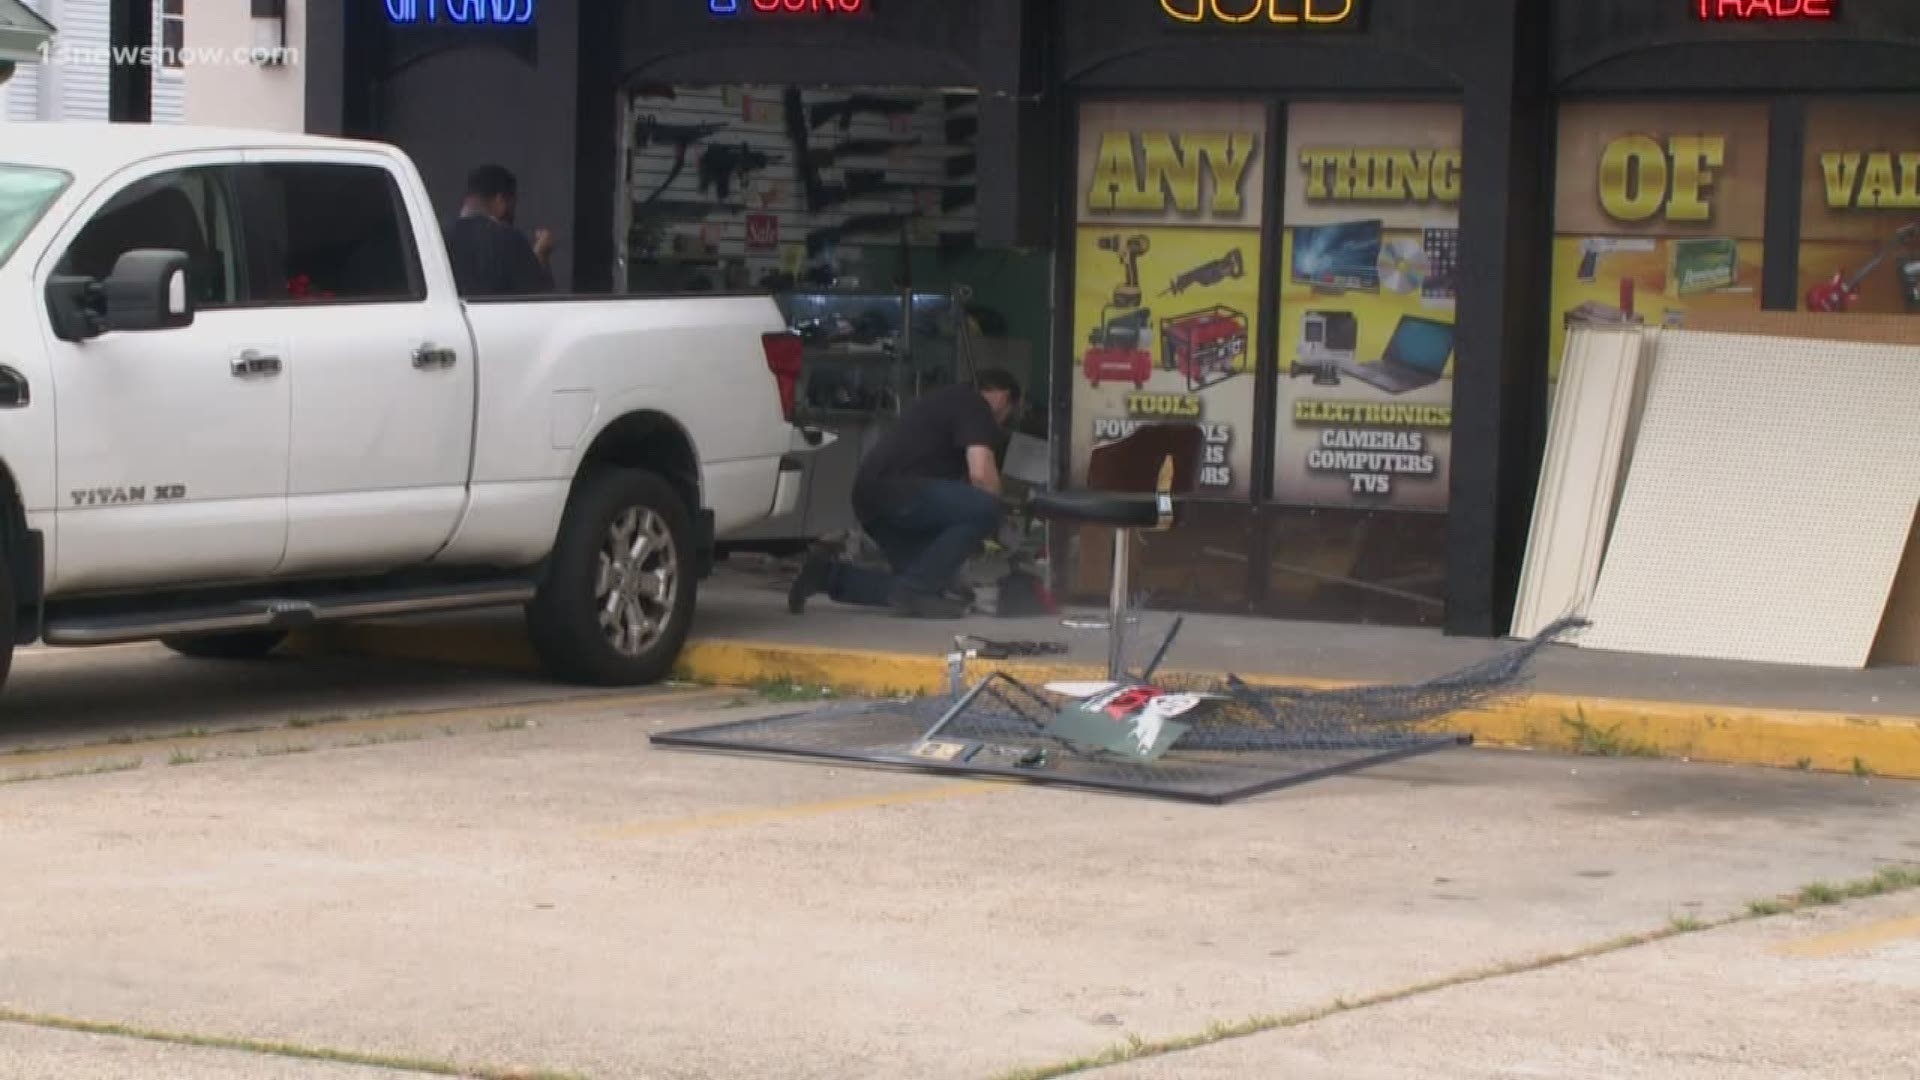 Portsmouth police are investigating after a car crashed into a Pawn Shop.